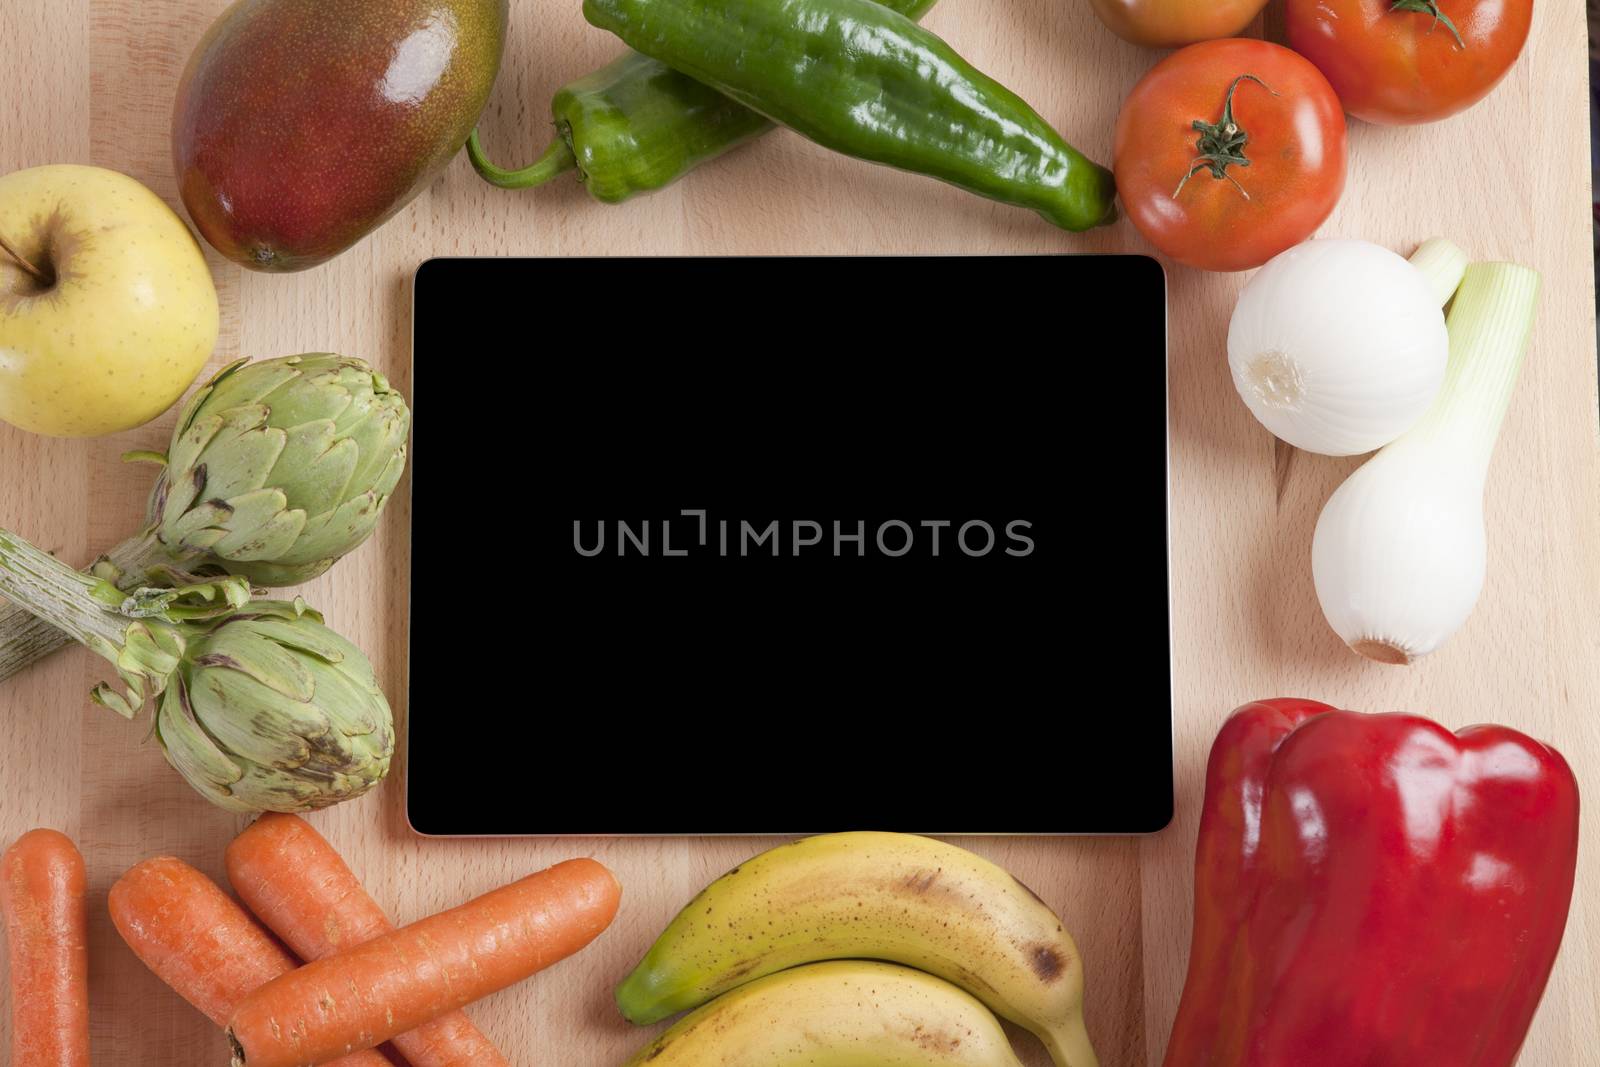 blank screen tablet still life fruits and vegetables around on brown wood plank